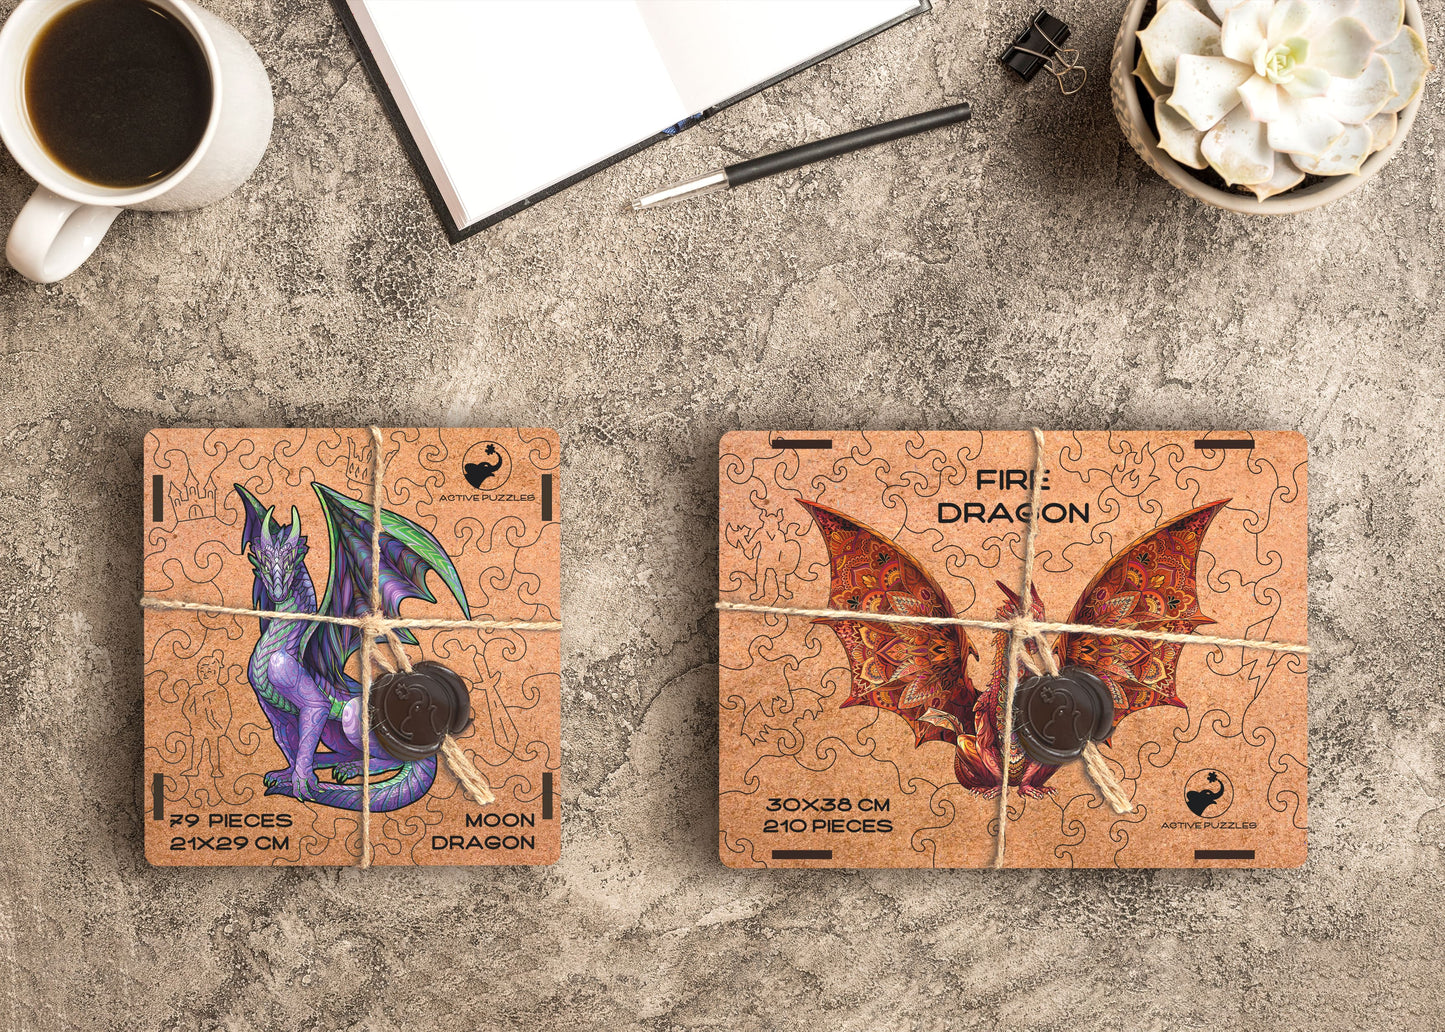 Dragons Wooden Puzzles Pack, Dragon and Fire Dragon Wooden Special Premium Pack of 2 Puzzles Active Puzzles